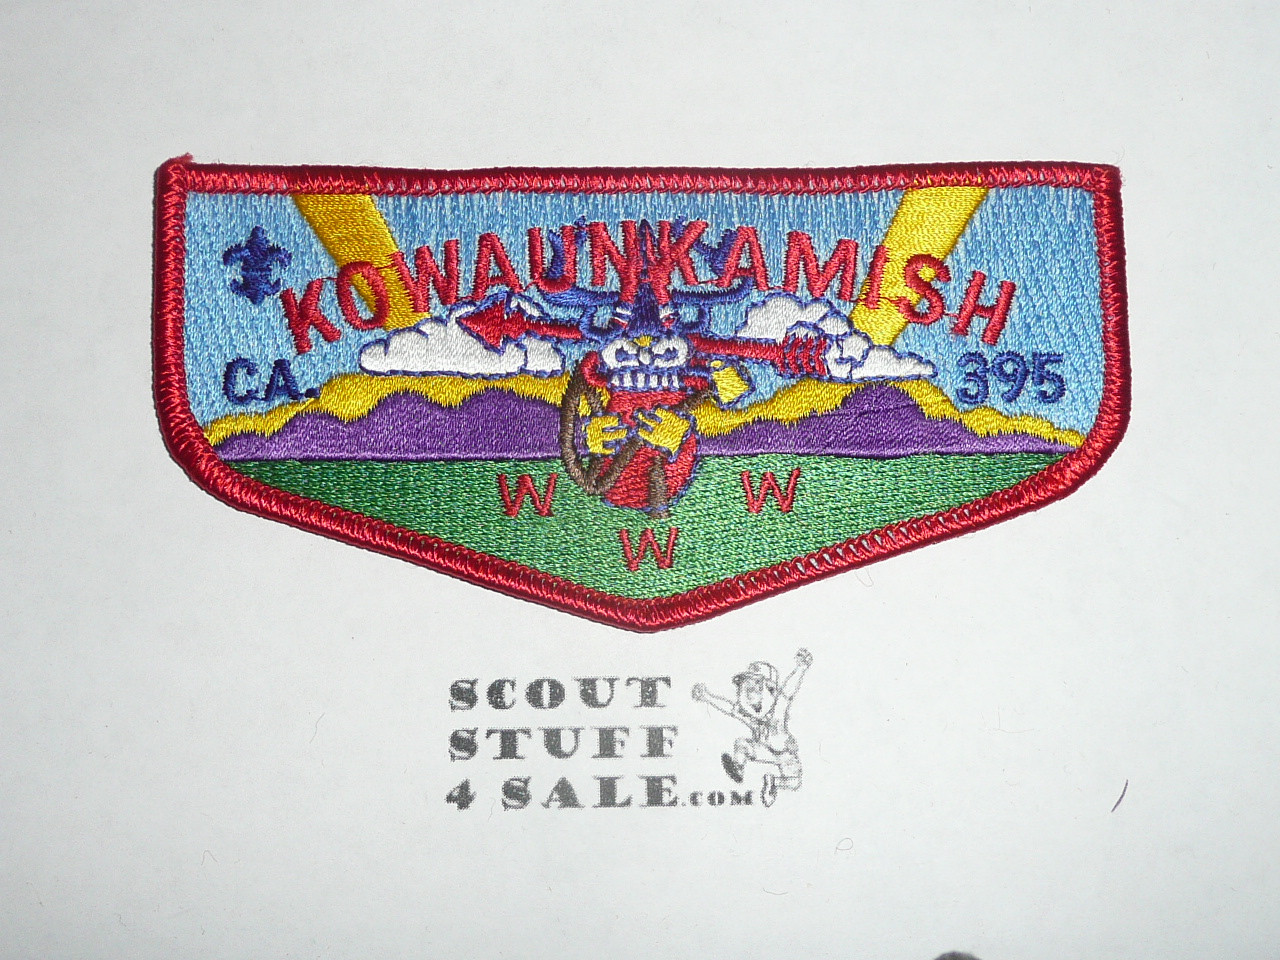 Order of the Arrow Lodge #395 Kowaunkamish s20 Flap Patch